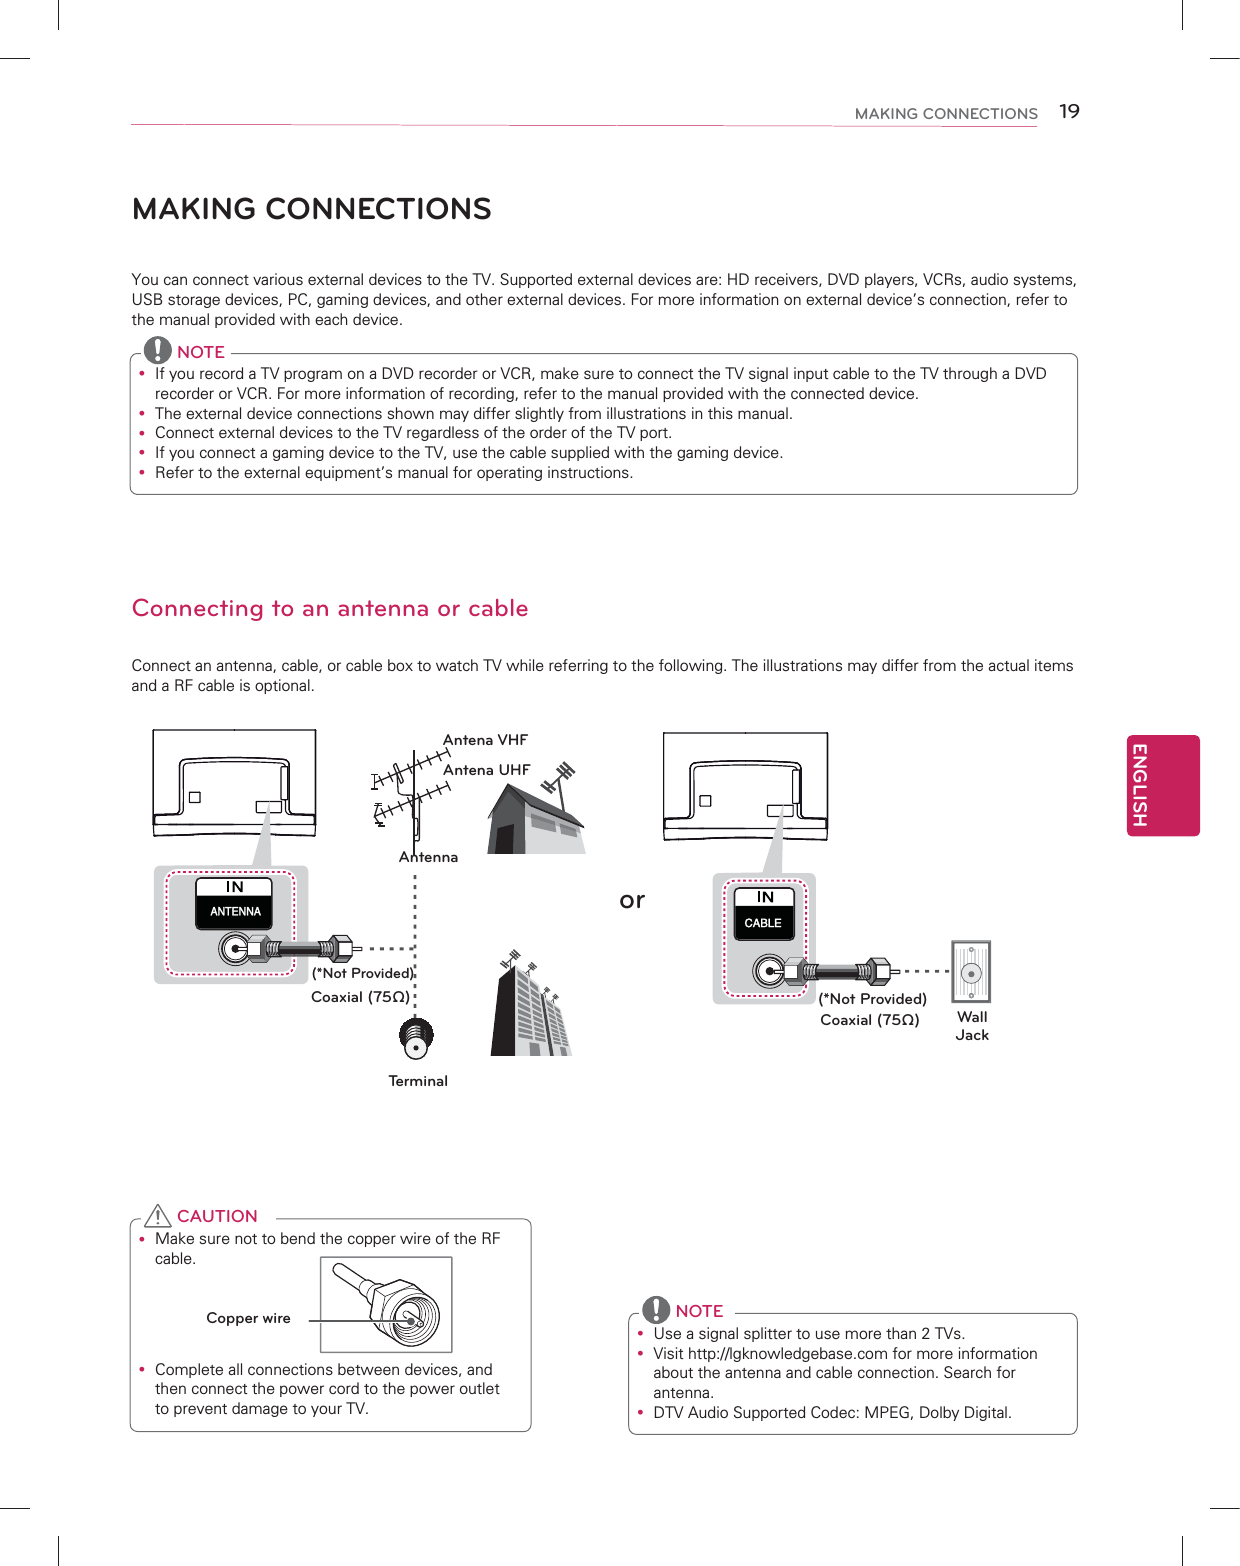 ENGLISH19MAKING CONNECTIONSMAKING CONNECTIONSYou can connect various external devices to the TV. Supported external devices are: HD receivers, DVD players, VCRs, audio systems, USB storage devices, PC, gaming devices, and other external devices. For more information on external device’s connection, refer to the manual provided with each device. Connecting to an antenna or cableConnect an antenna, cable, or cable box to watch TV while referring to the following. The illustrations may differ from the actual items and a RF cable is optional.y Make sure not to bend the copper wire of the RF cable.Copper wirey Complete all connections between devices, and then connect the power cord to the power outlet to prevent damage to your TV. CAUTIONy If you record a TV program on a DVD recorder or VCR, make sure to connect the TV signal input cable to the TV through a DVD recorder or VCR. For more information of recording, refer to the manual provided with the connected device.y The external device connections shown may differ slightly from illustrations in this manual.y Connect external devices to the TV regardless of the order of the TV port.y If you connect a gaming device to the TV, use the cable supplied with the gaming device.y Refer to the external equipment’s manual for operating instructions. NOTE(*Not Provided)(*Not Provided)AntennaAntena VHFAntena UHFCoaxial (75Ω)Wall  JackCoaxial (75Ω)orTerminaly Use a signal splitter to use more than 2 TVs.y Visit http://lgknowledgebase.com for more information about the antenna and cable connection. Search for antenna.y DTV Audio Supported Codec: MPEG, Dolby Digital. NOTE